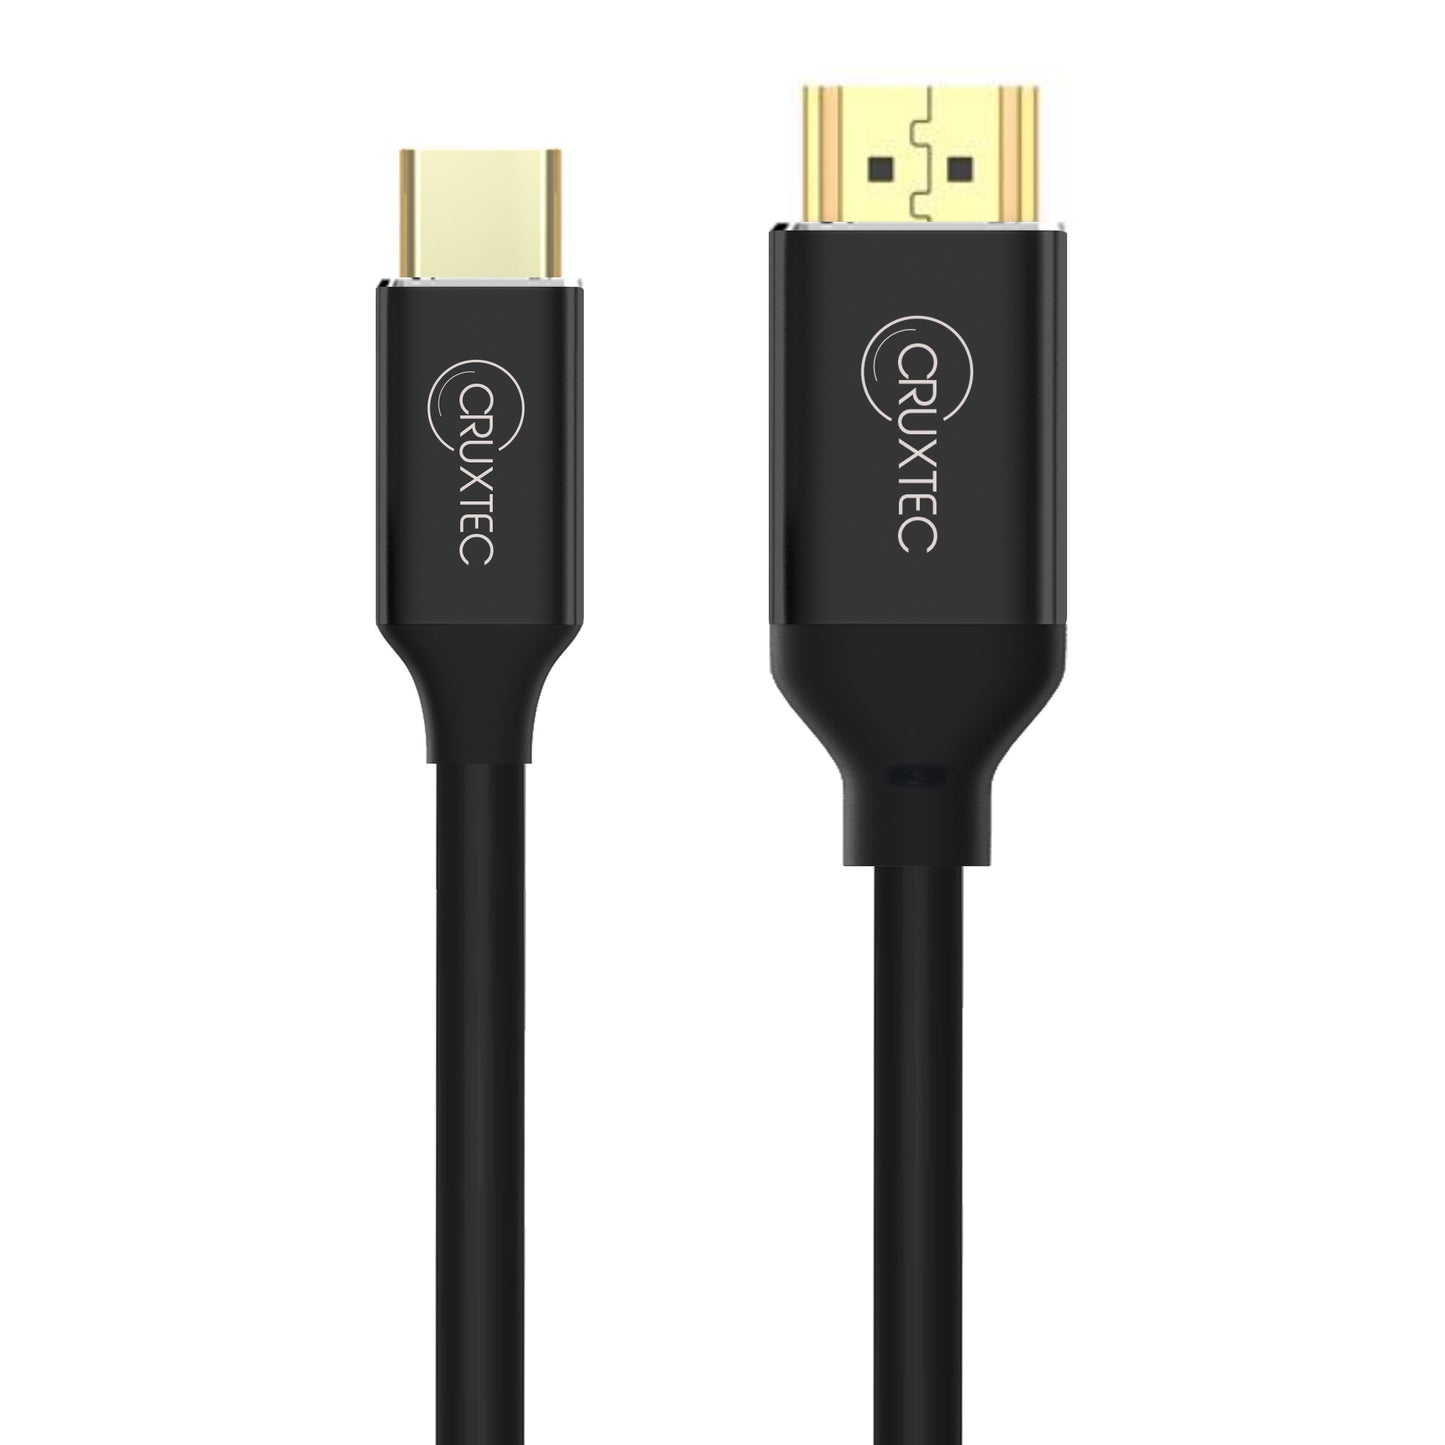 Cruxtec USB-C to HDMI 2.1 Cable Support HDR ( 8K@60Hz, 4K@120Hz )